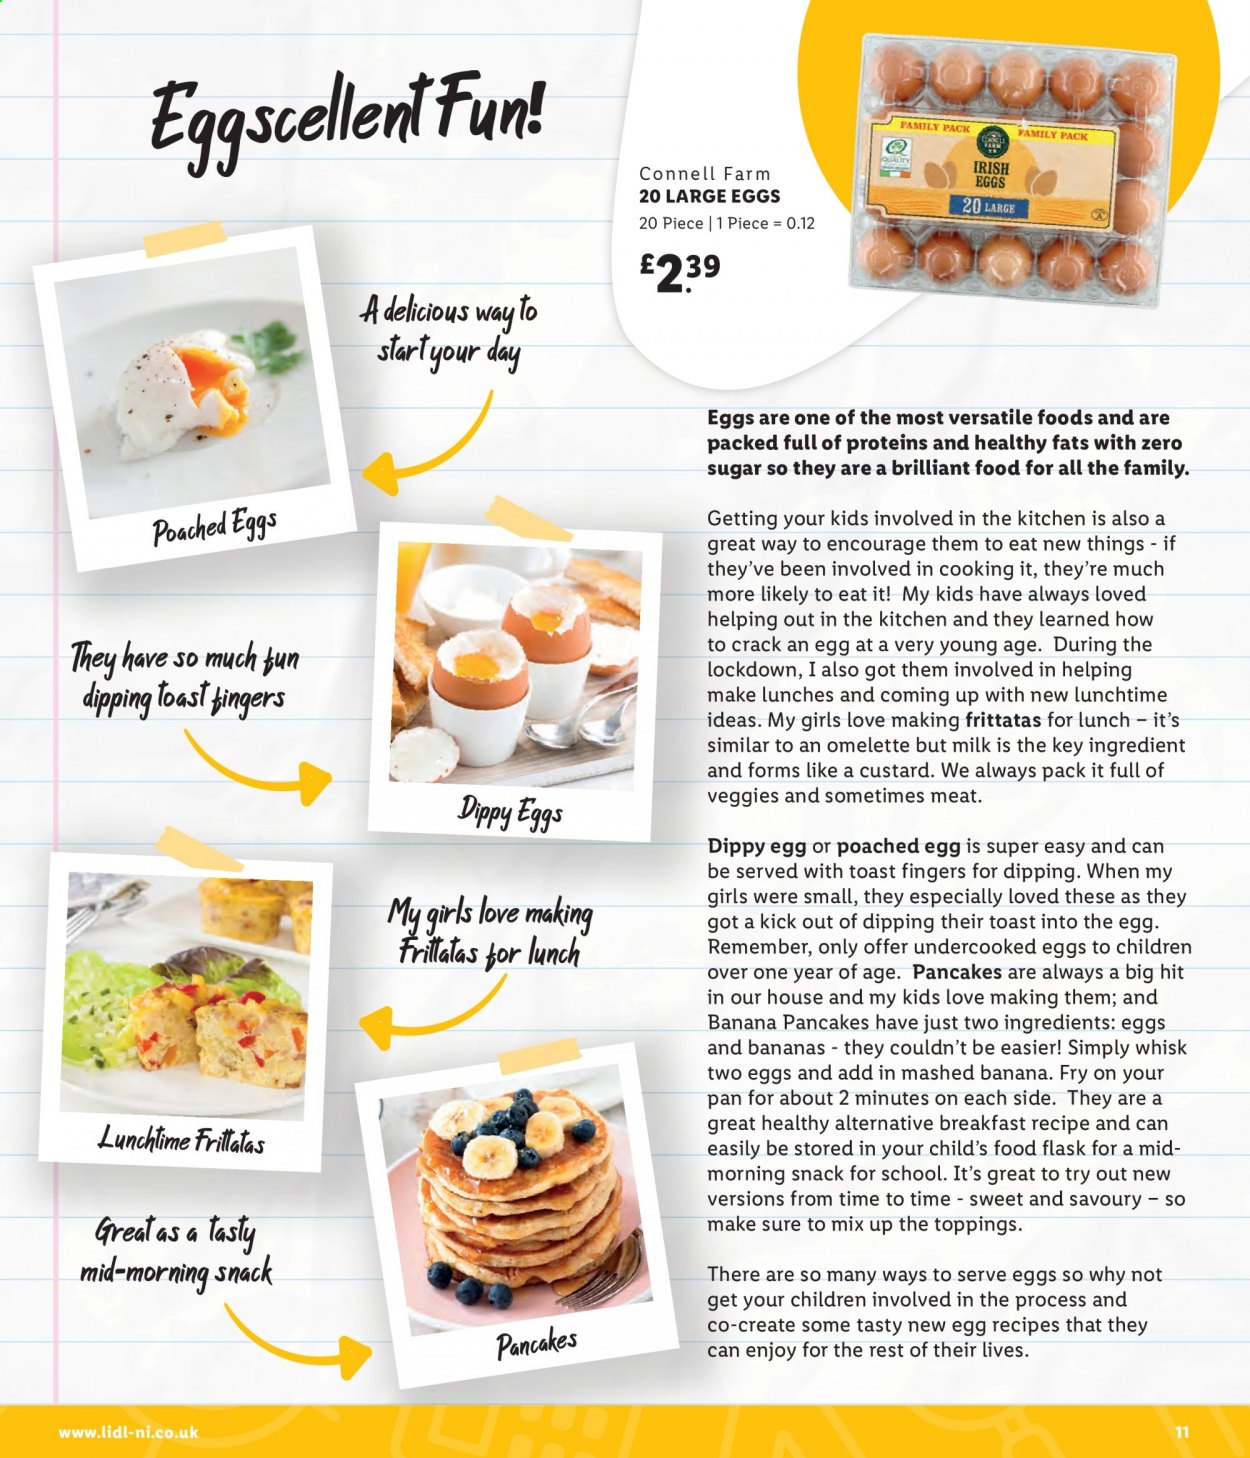 thumbnail - Lidl offer  - Sales products - bananas, pancakes, custard, milk, large eggs, snack, pan, food flask. Page 11.